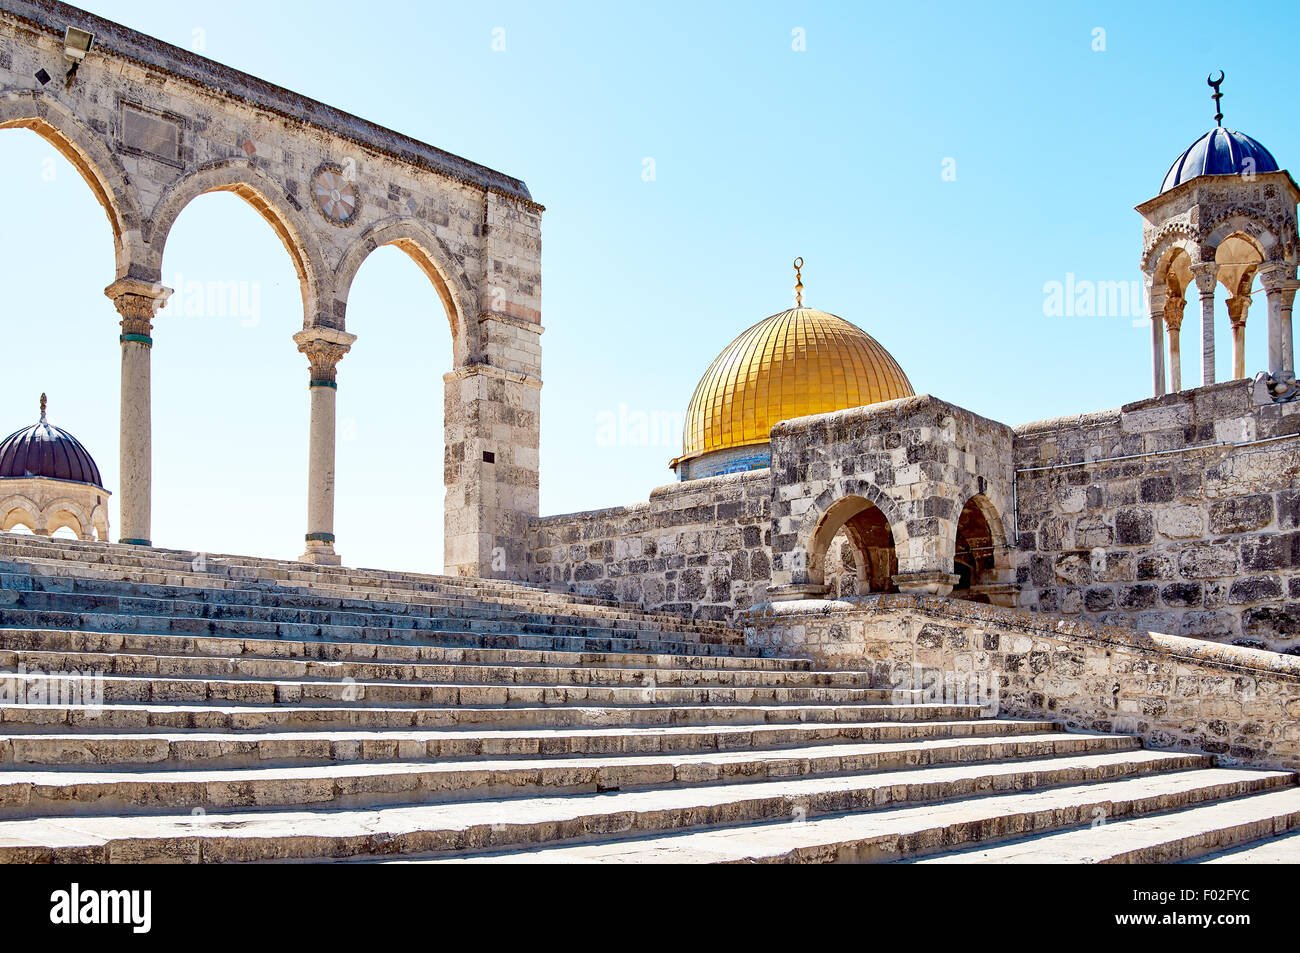 Arch next to Dome of the Rock, the most known mosque in Jerusalem. Stock Photo